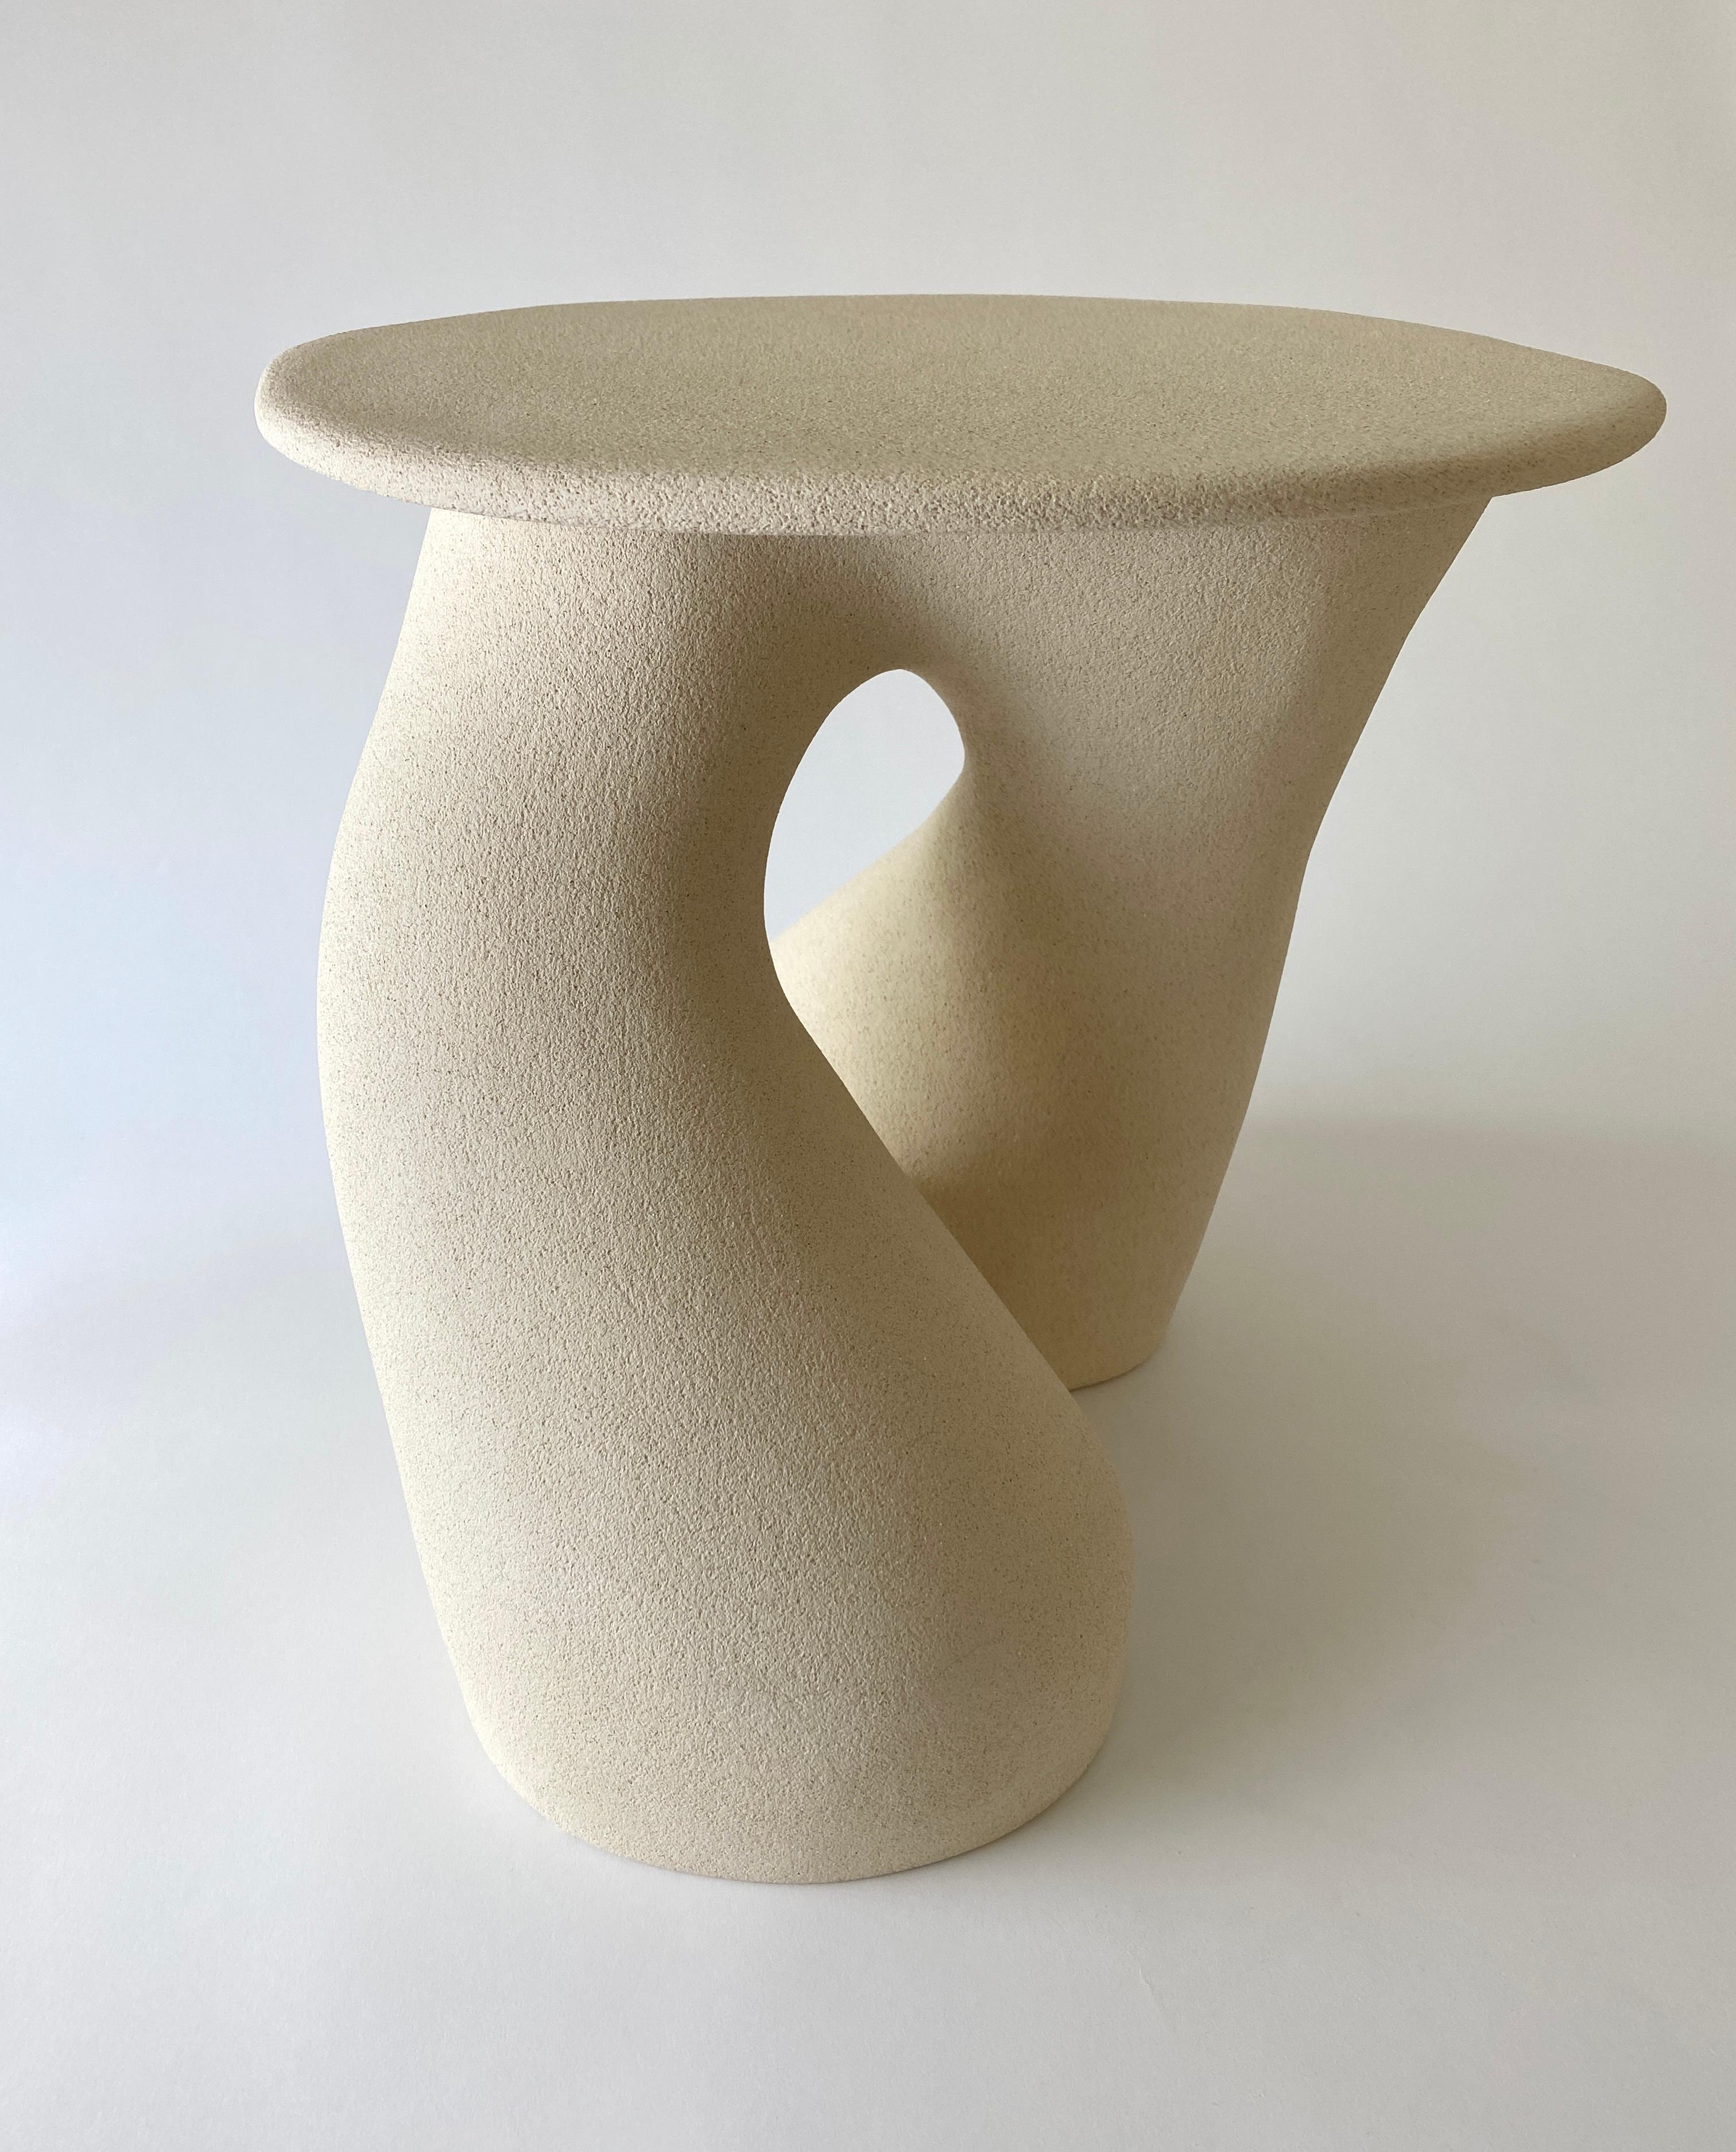 Sandstone Gabrielle side table handsculped by Hermine Bourdin 
Unique
Dimensions: 40 x 40 x 40 cm
Materials: Sandstone

In my work I’m trying to represent women who are free, who are generous, voluptuous, sensual, strong, thriving and